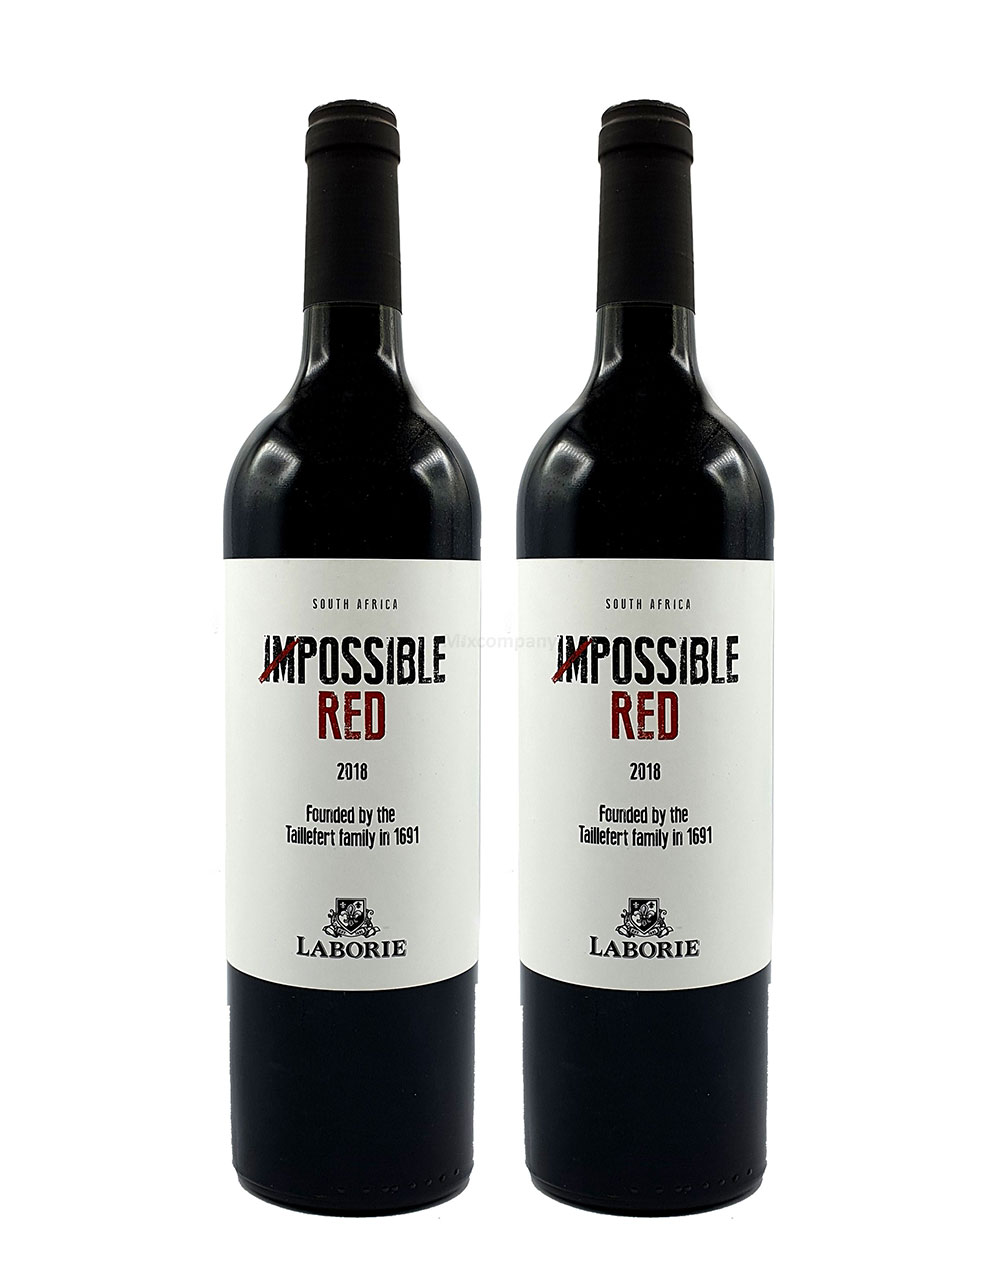 Laborie Rotwein 2er Set Impossible Red South Africa 2x 0,75L (14% Vol)-Jahrgang variierend